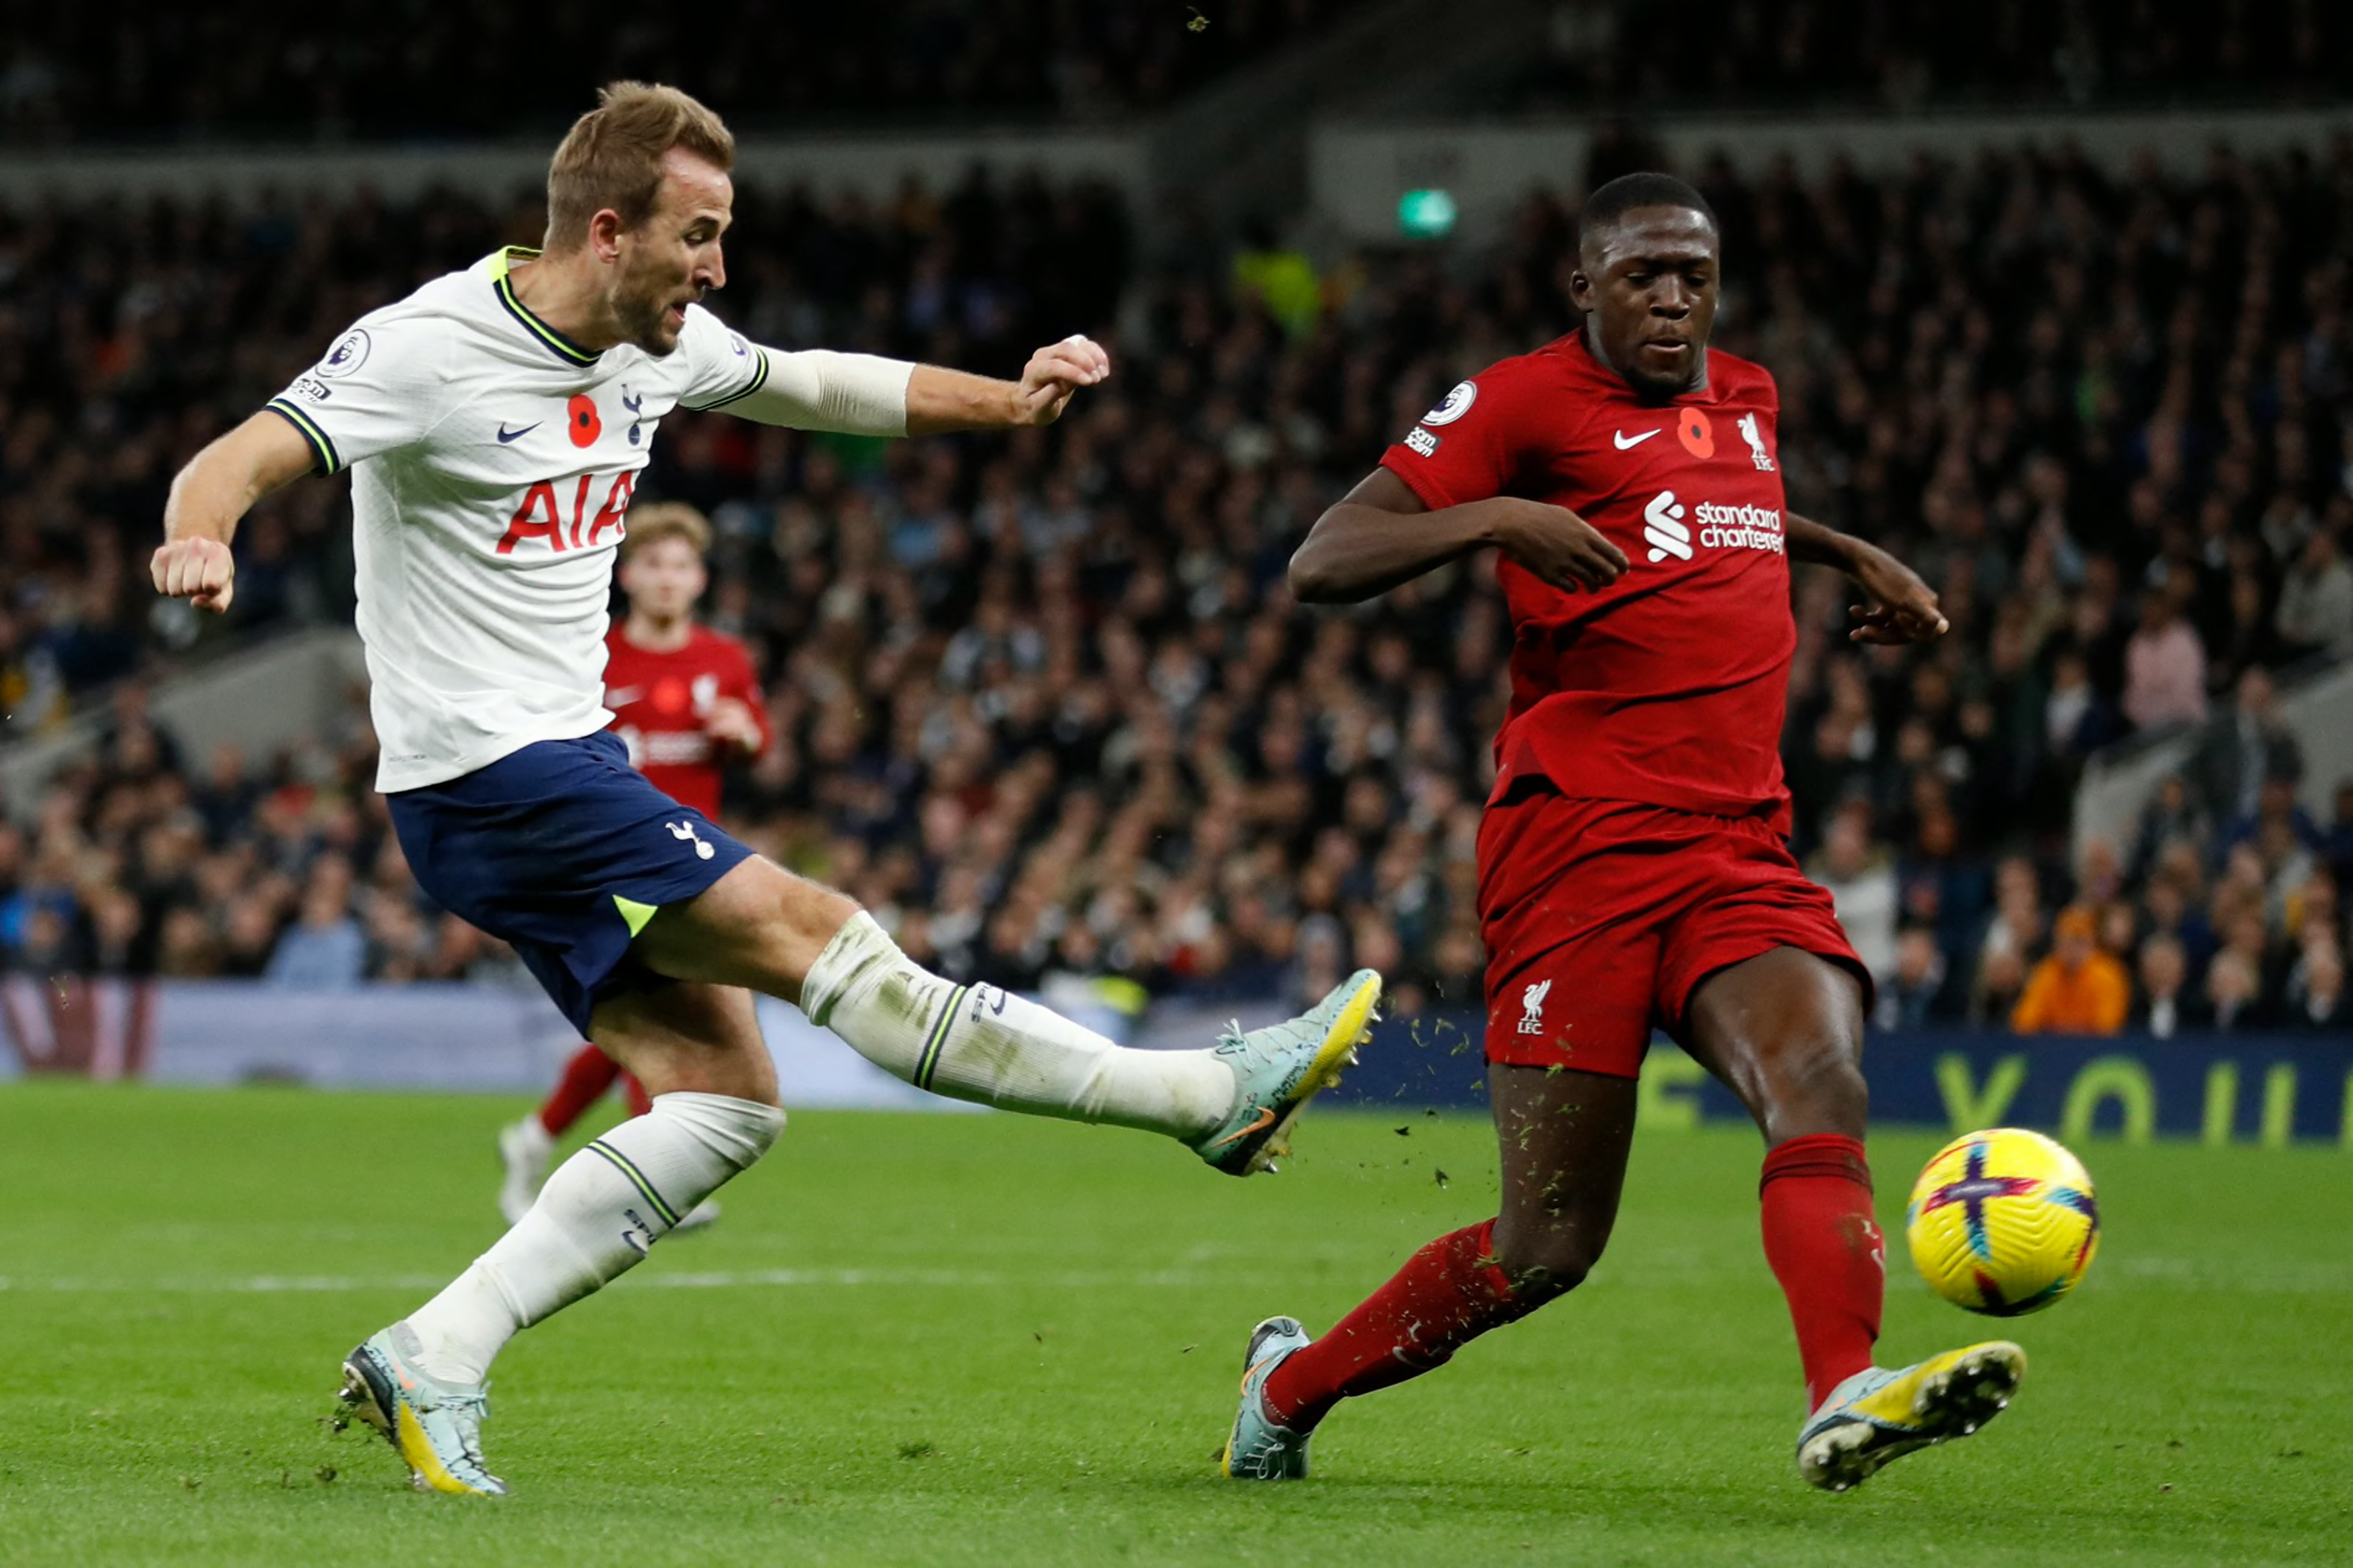 Tottenham Hotspur's English striker Harry Kane (L) scores his team's first goal past Liverpool's French defender Ibrahima Konate (R) during the English Premier League football match between Tottenham Hotspur and Liverpool at Tottenham Hotspur Stadium in London, on November 6, 2022. (Photo by IAN KINGTON/AFP via Getty Images)